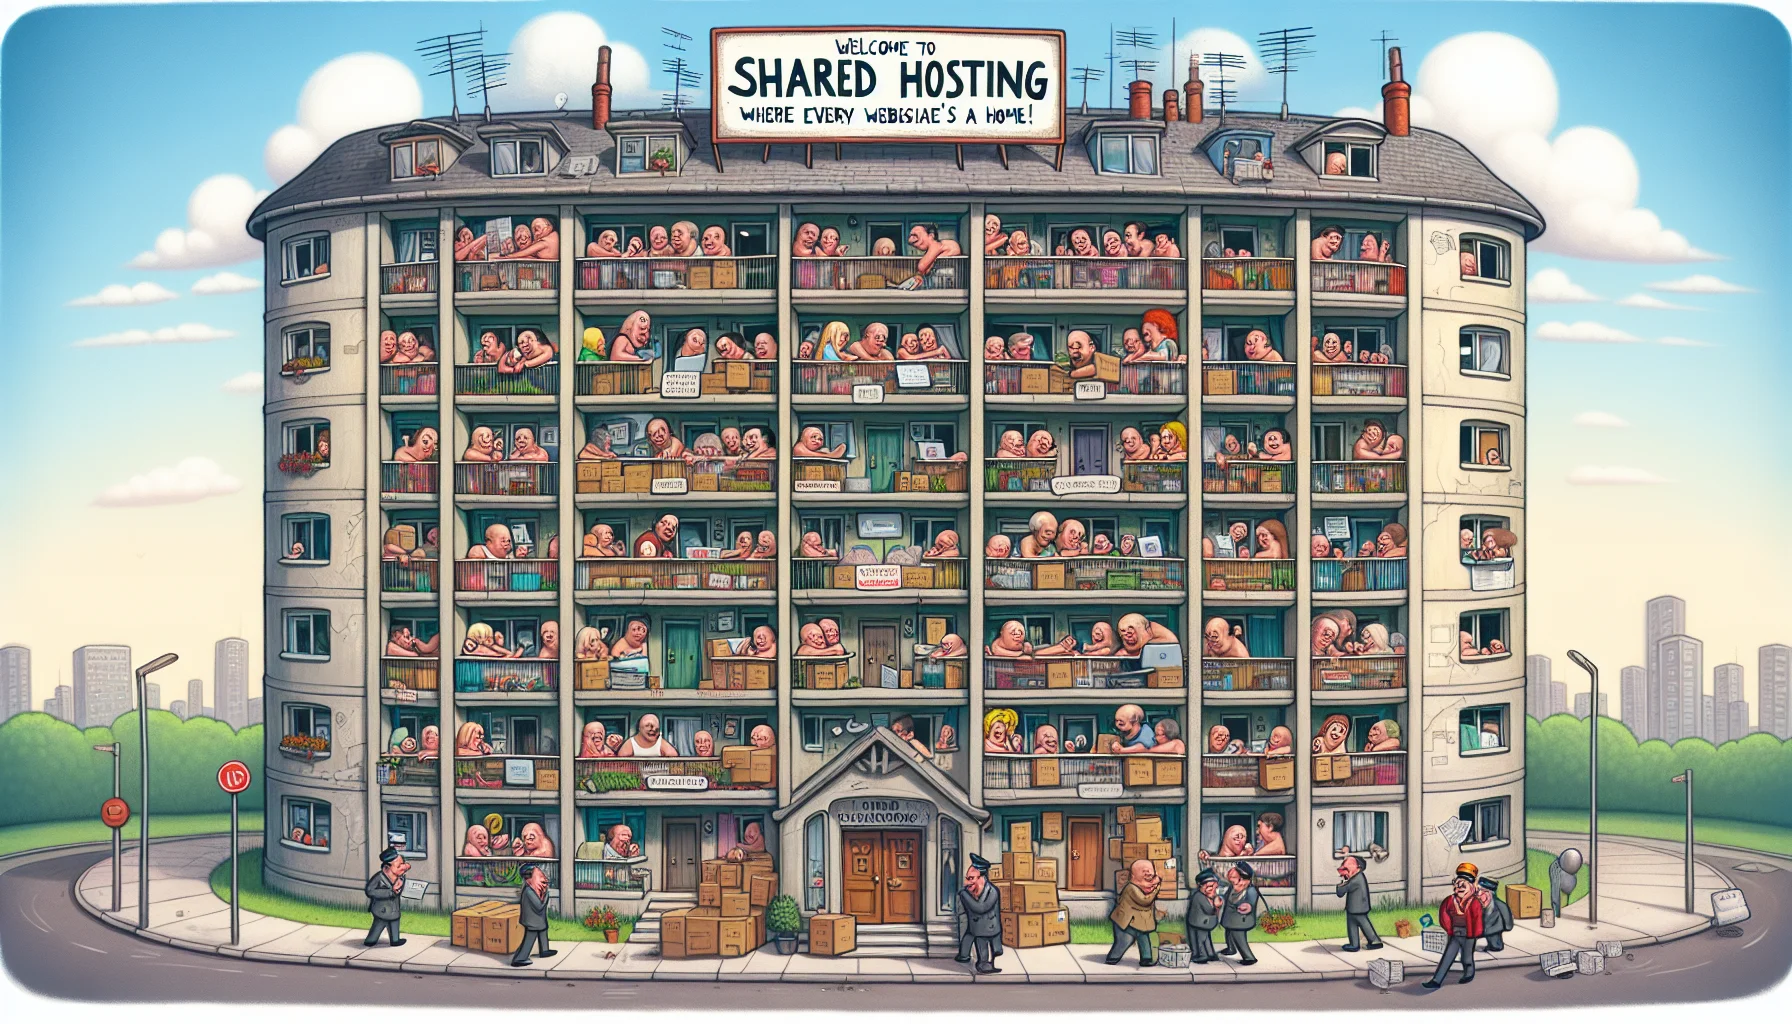 Illustrate a humorous scenario that metaphorically represents shared hosting. Show an old, spacious and slightly worn-out apartment building, with each apartment representing a website. There are diverse people of various descents and genders, peeking from their windows, symbolising website owners. Several busy postmen, representing IP addresses, diligently deliver packages to each apartment. Some apartments have crowded balconies, implying websites with high traffic. There's a whimsical notice board at the front, reading 'Welcome to Shared Hosting Apartments, where every website has a home!' The image should be enticing and convey the shared resources, yet charm and chaos of shared hosting.